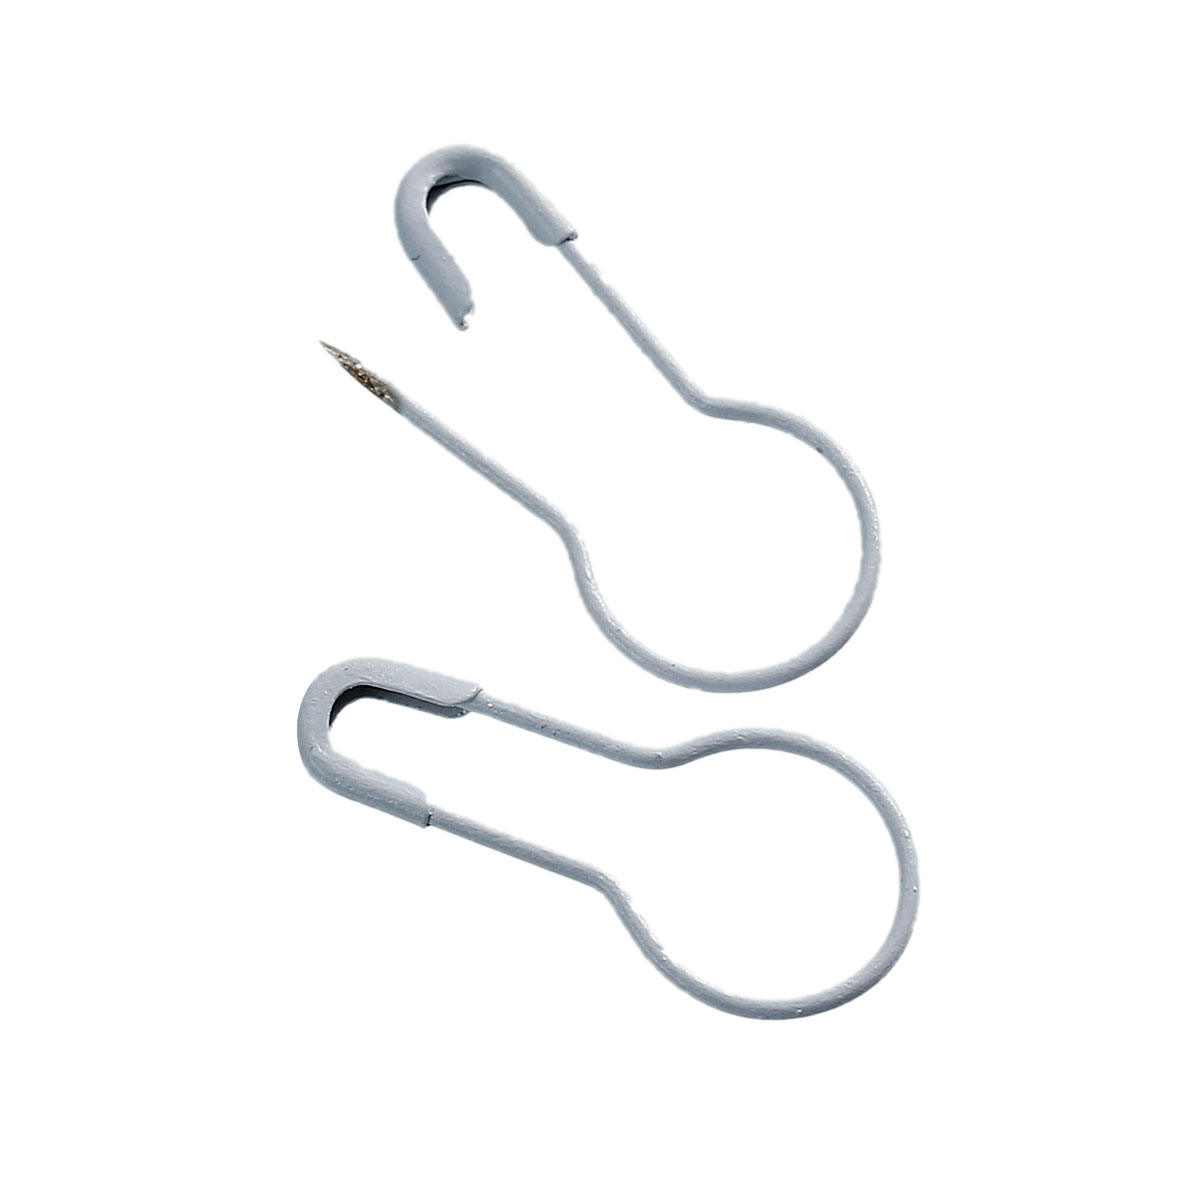 Picture of Copper Safety Pins Brooches Findings White 22mm( 7/8") x 10mm( 3/8") - 21mm x 9mm, 100 PCs